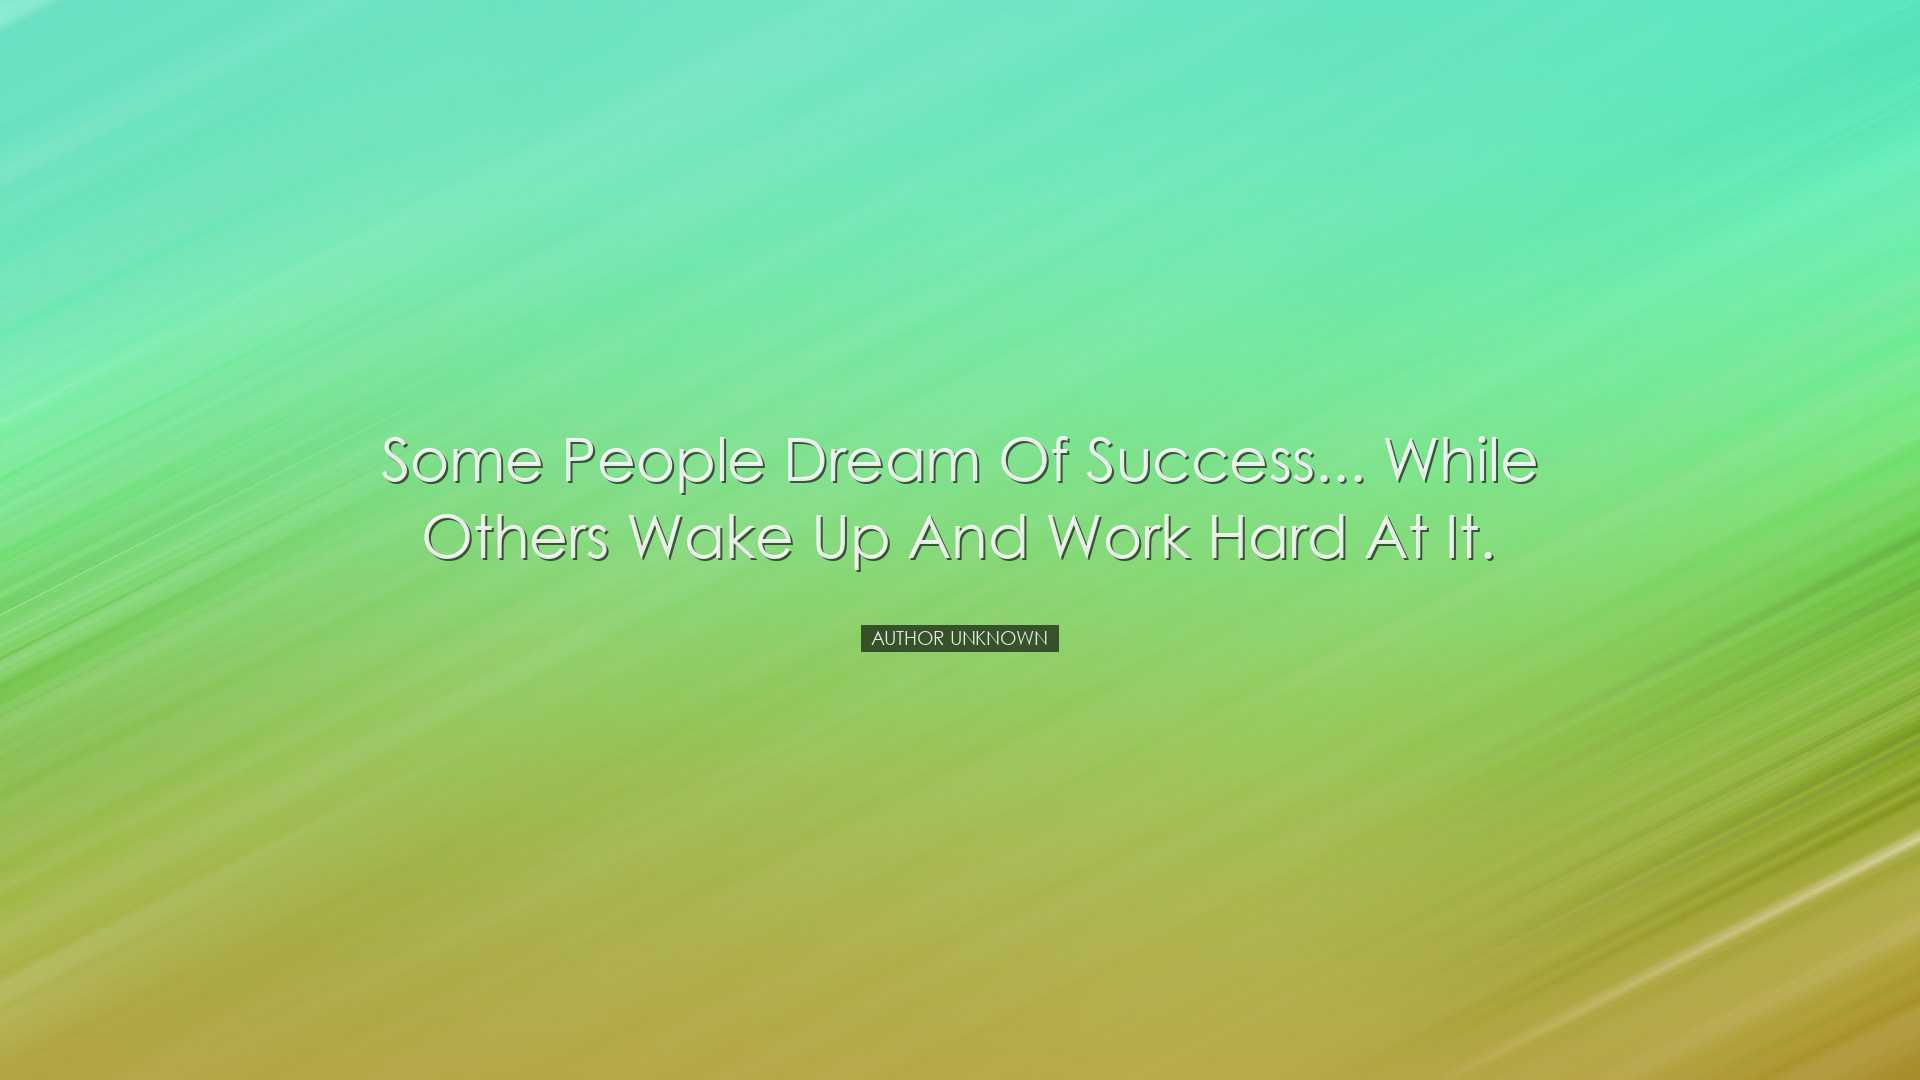 Some people dream of success... while others wake up and work hard